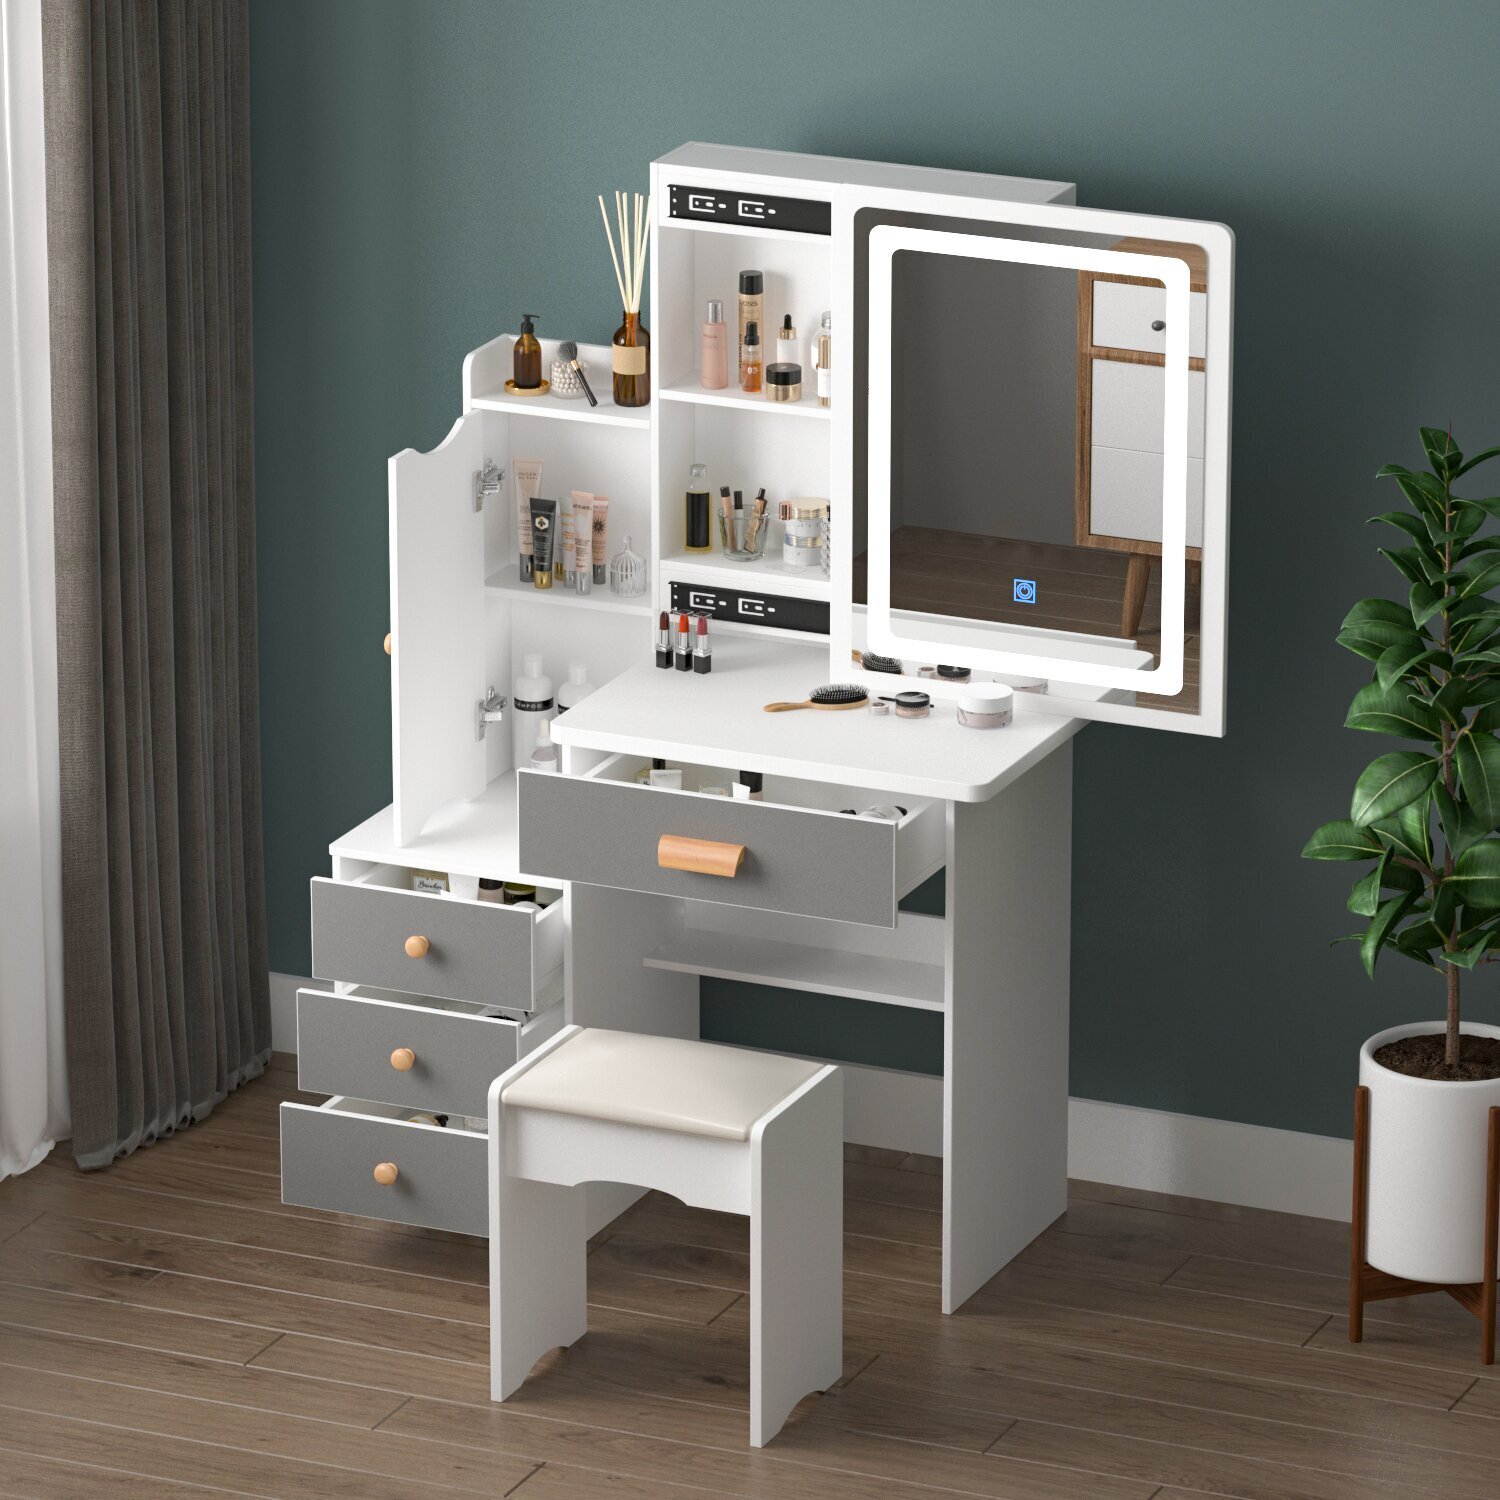 White Vanity Desk with Drawers and Storage